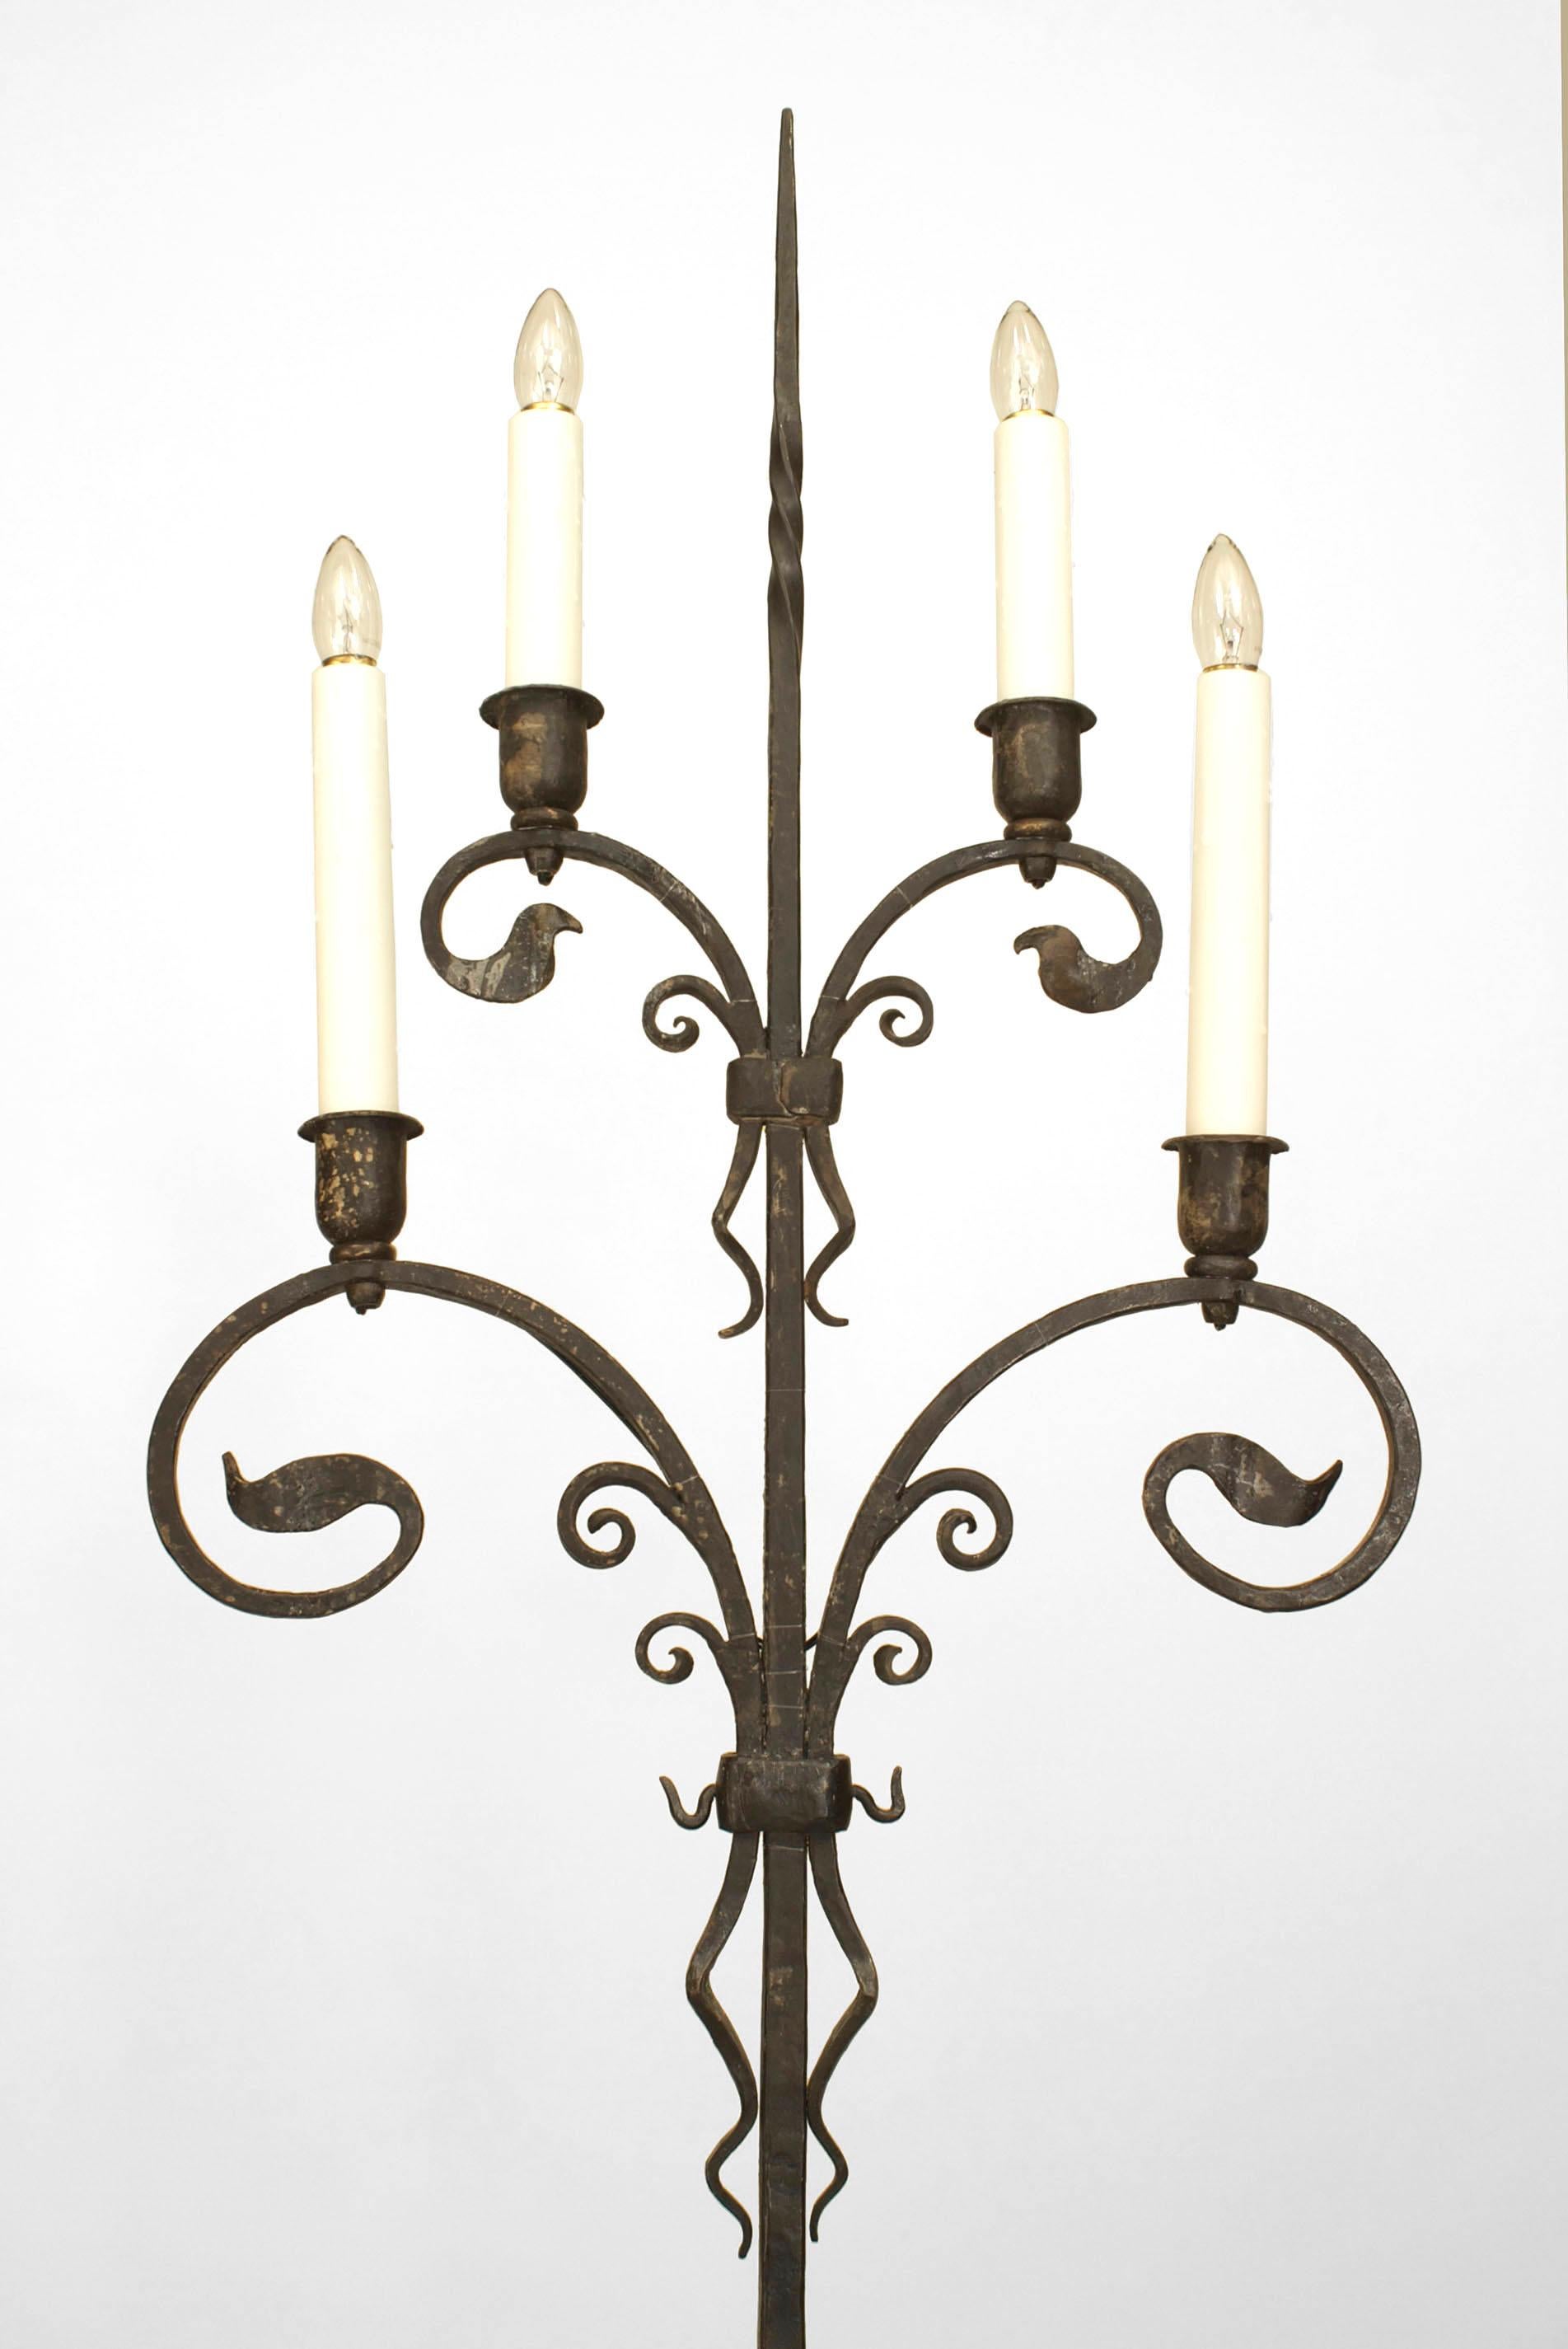 Pair of American Victorian (1910) wrought iron 4 light candle stands with scrolling foliate arms supported on a tripod base (attributed to SAMUEL YELLIN) (PRICED AS Pair).
